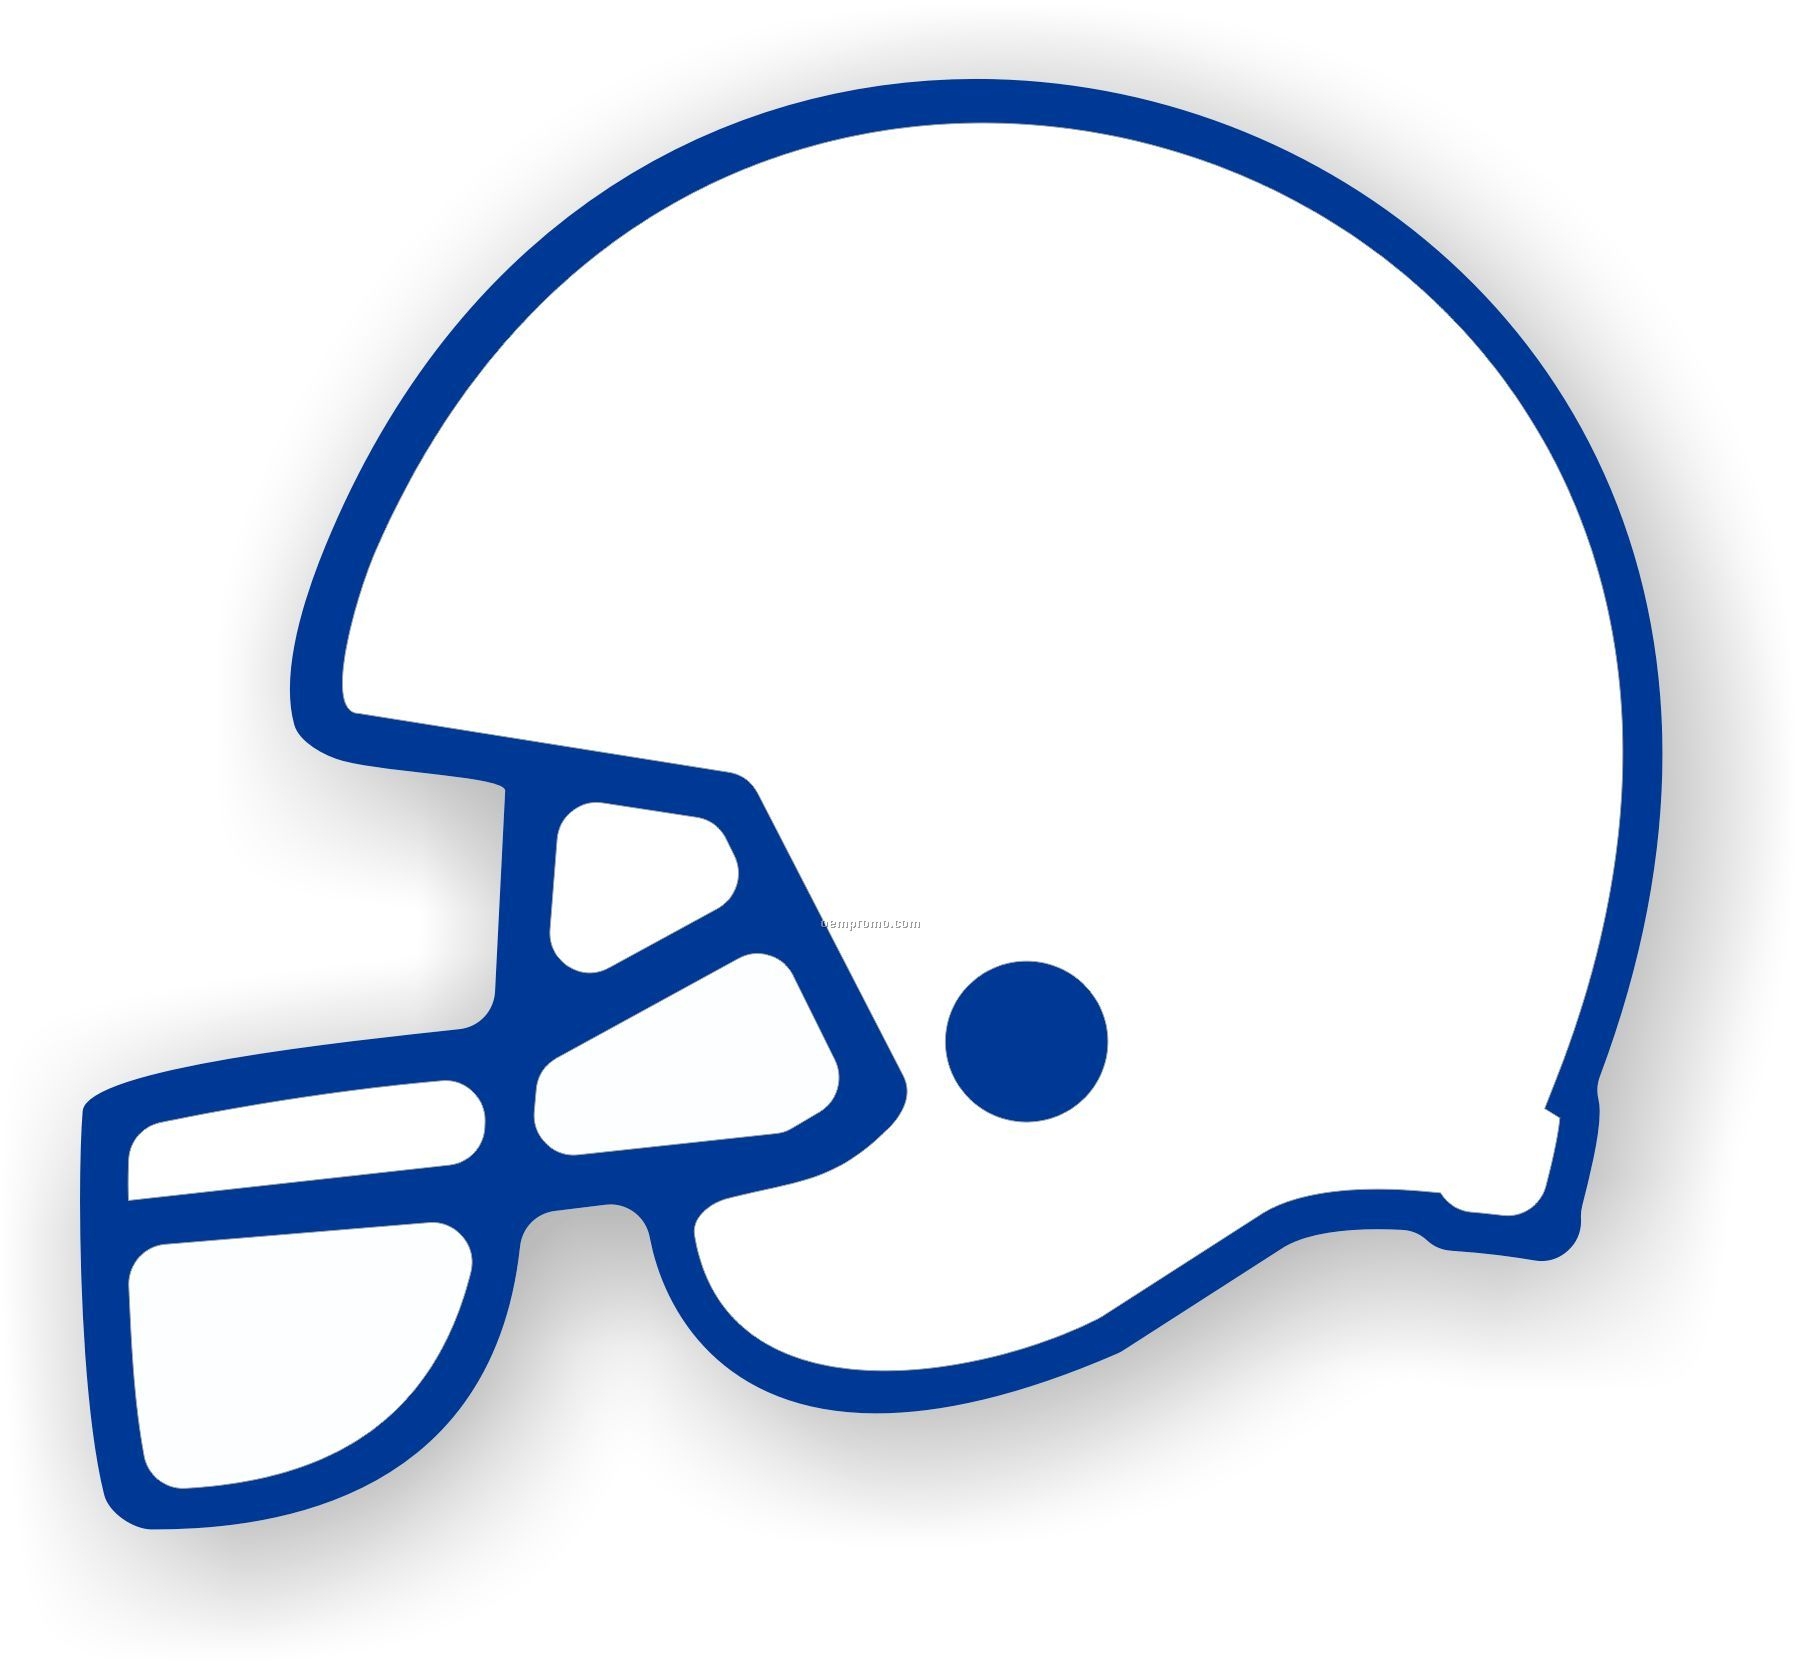 homecoming clipart simple football